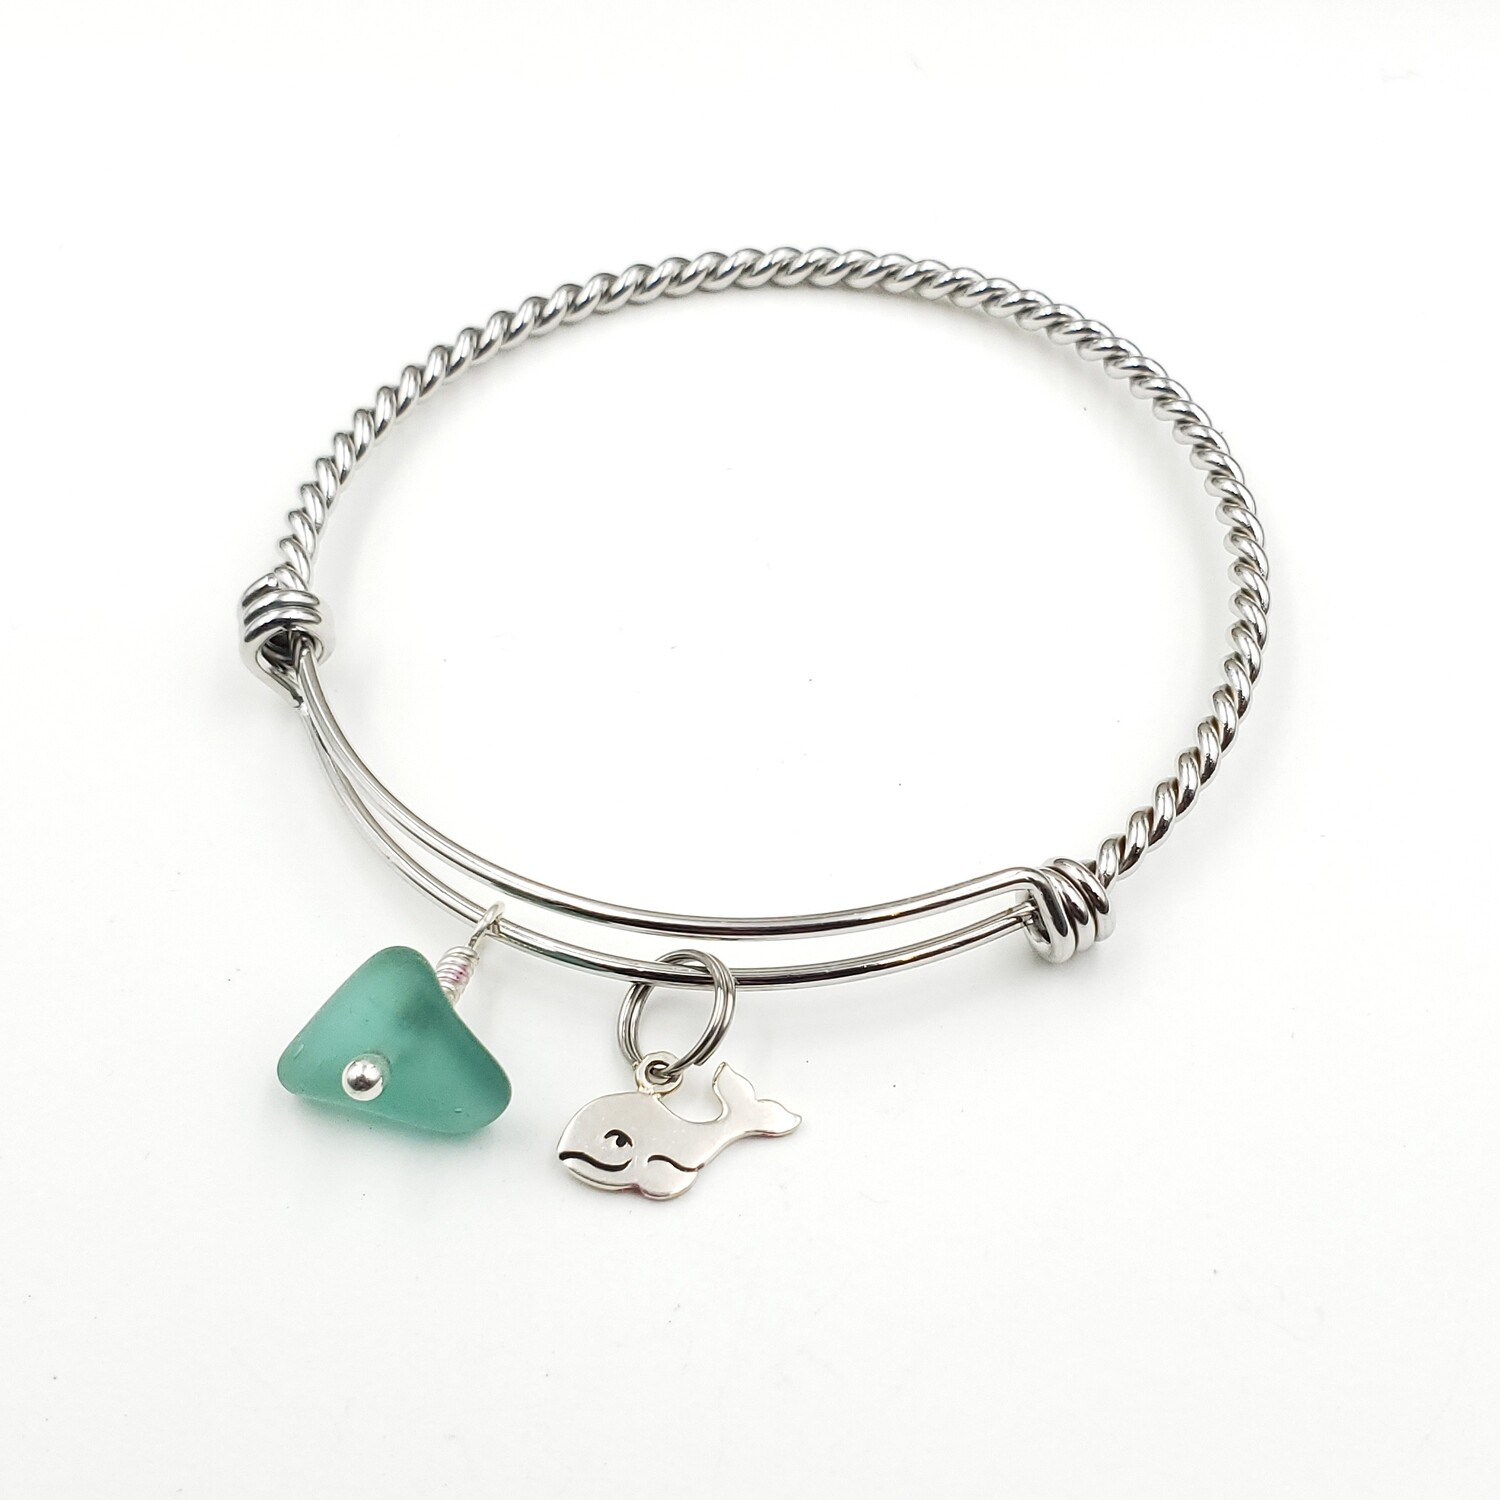 Twisted Bangle Bracelet with Whale Charm and Teal Lake Erie Beach Glass